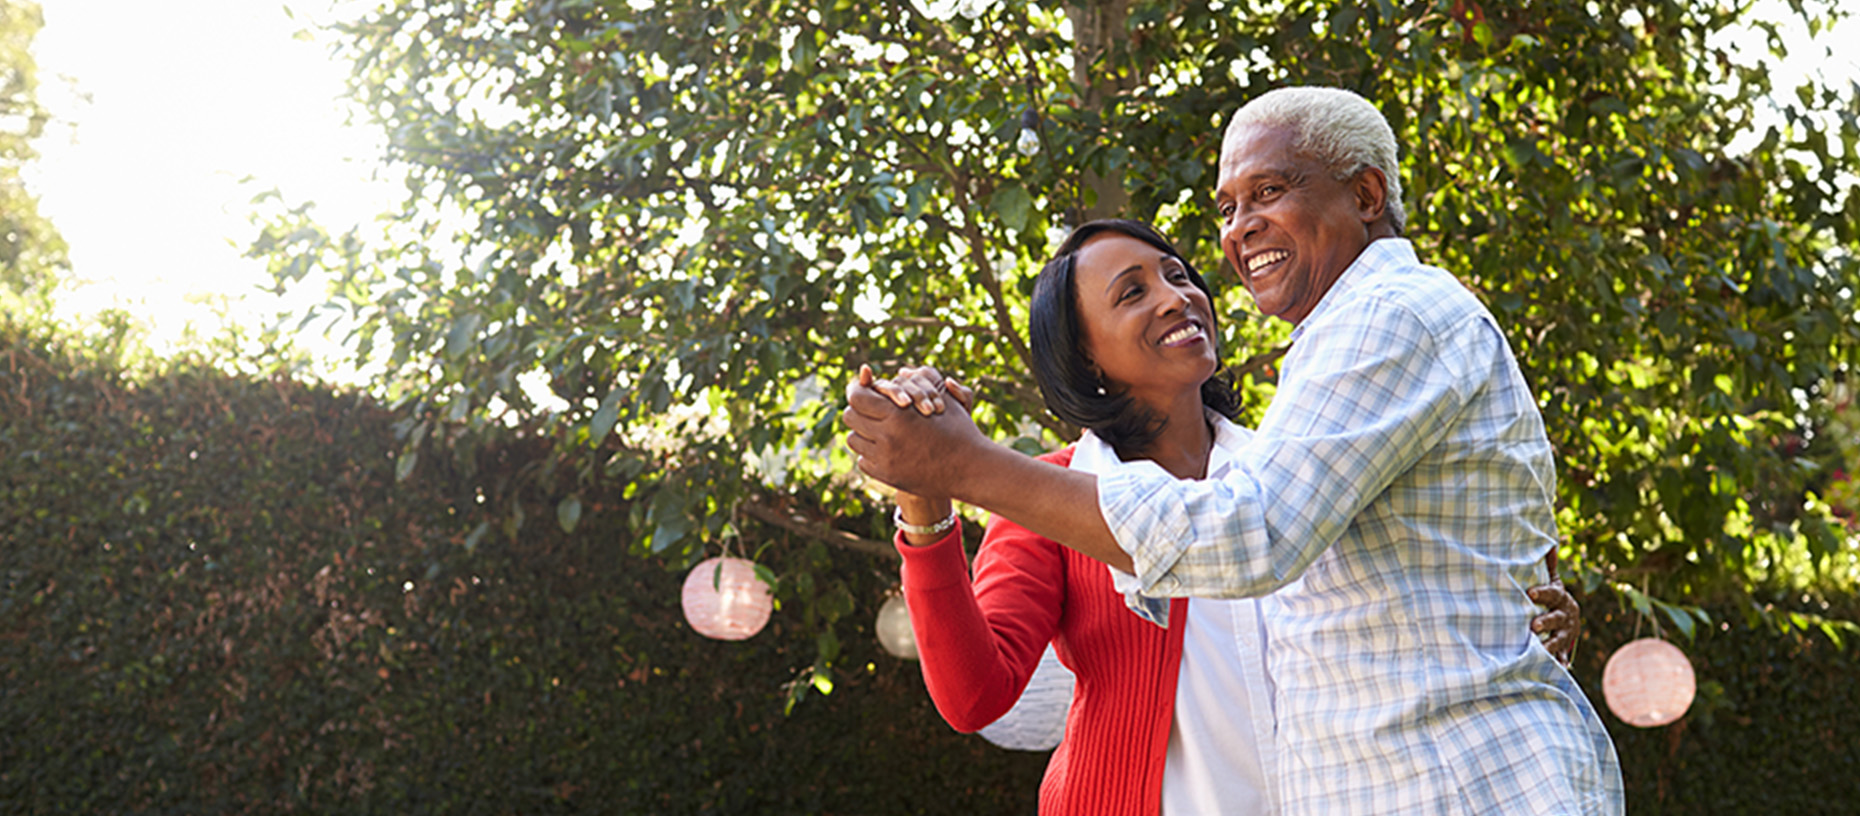 An older adult couple dances in their backyard.